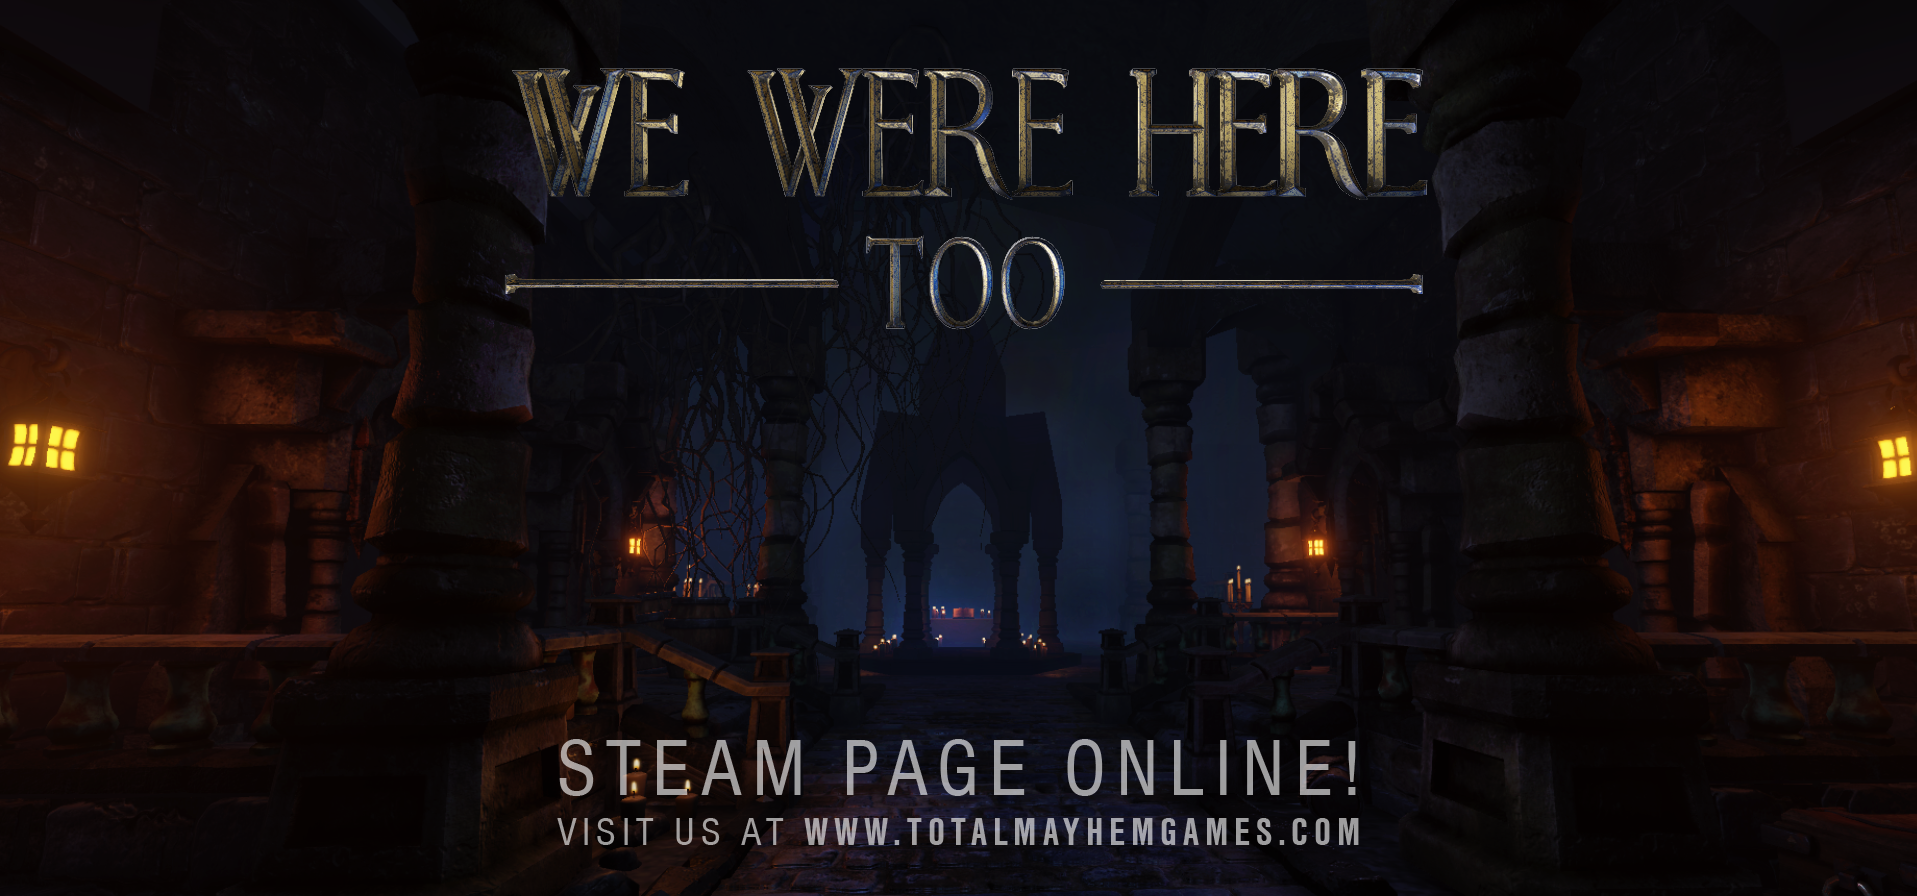 download we were here too steam